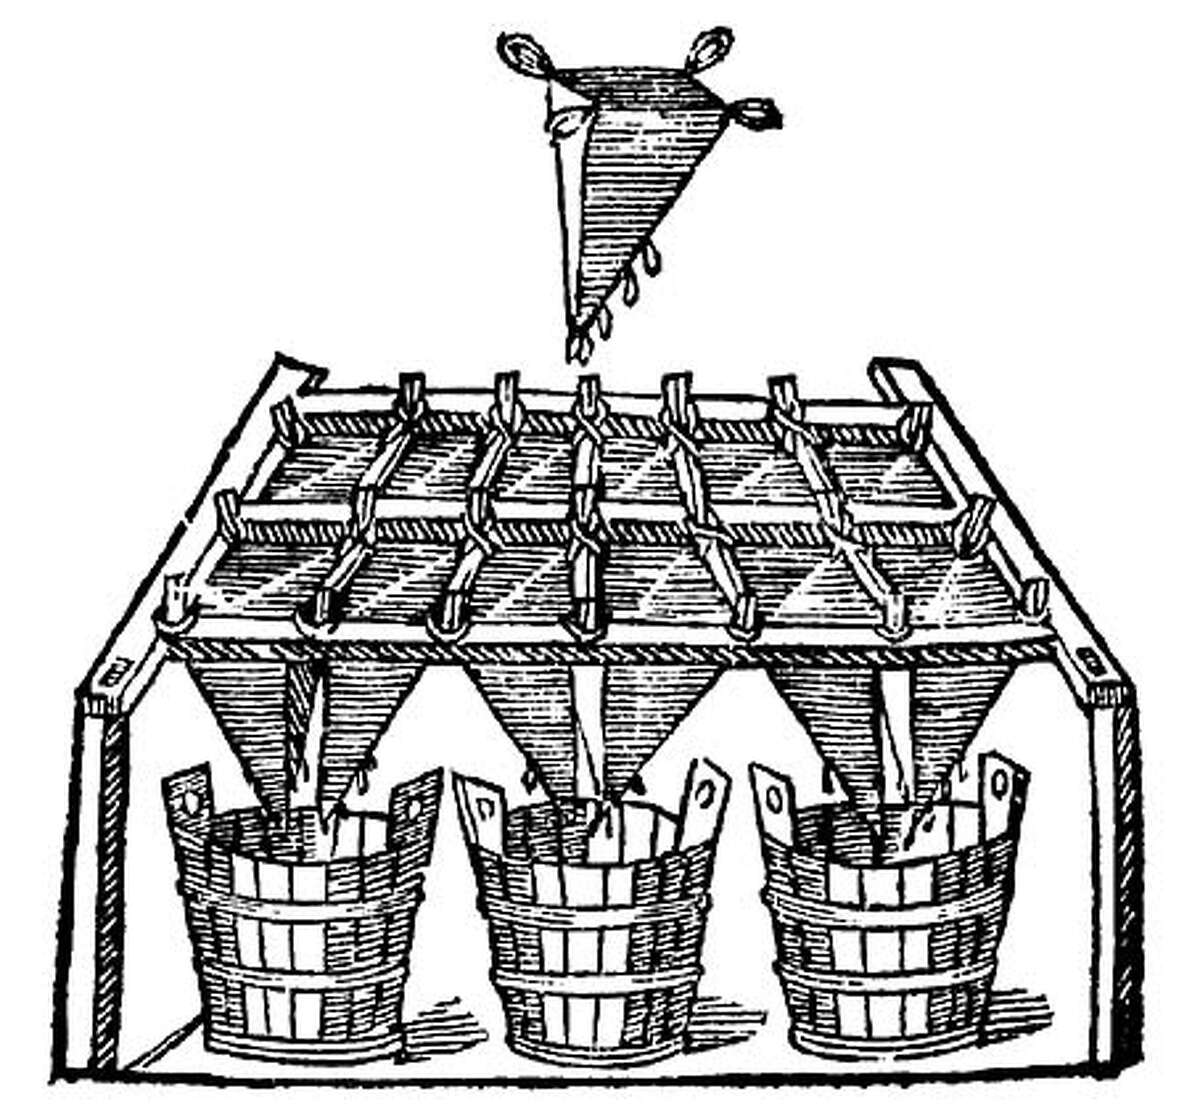 A wine filter shown in a 1572 book on Italian winemaking. Image courtesy of Sean Thackrey